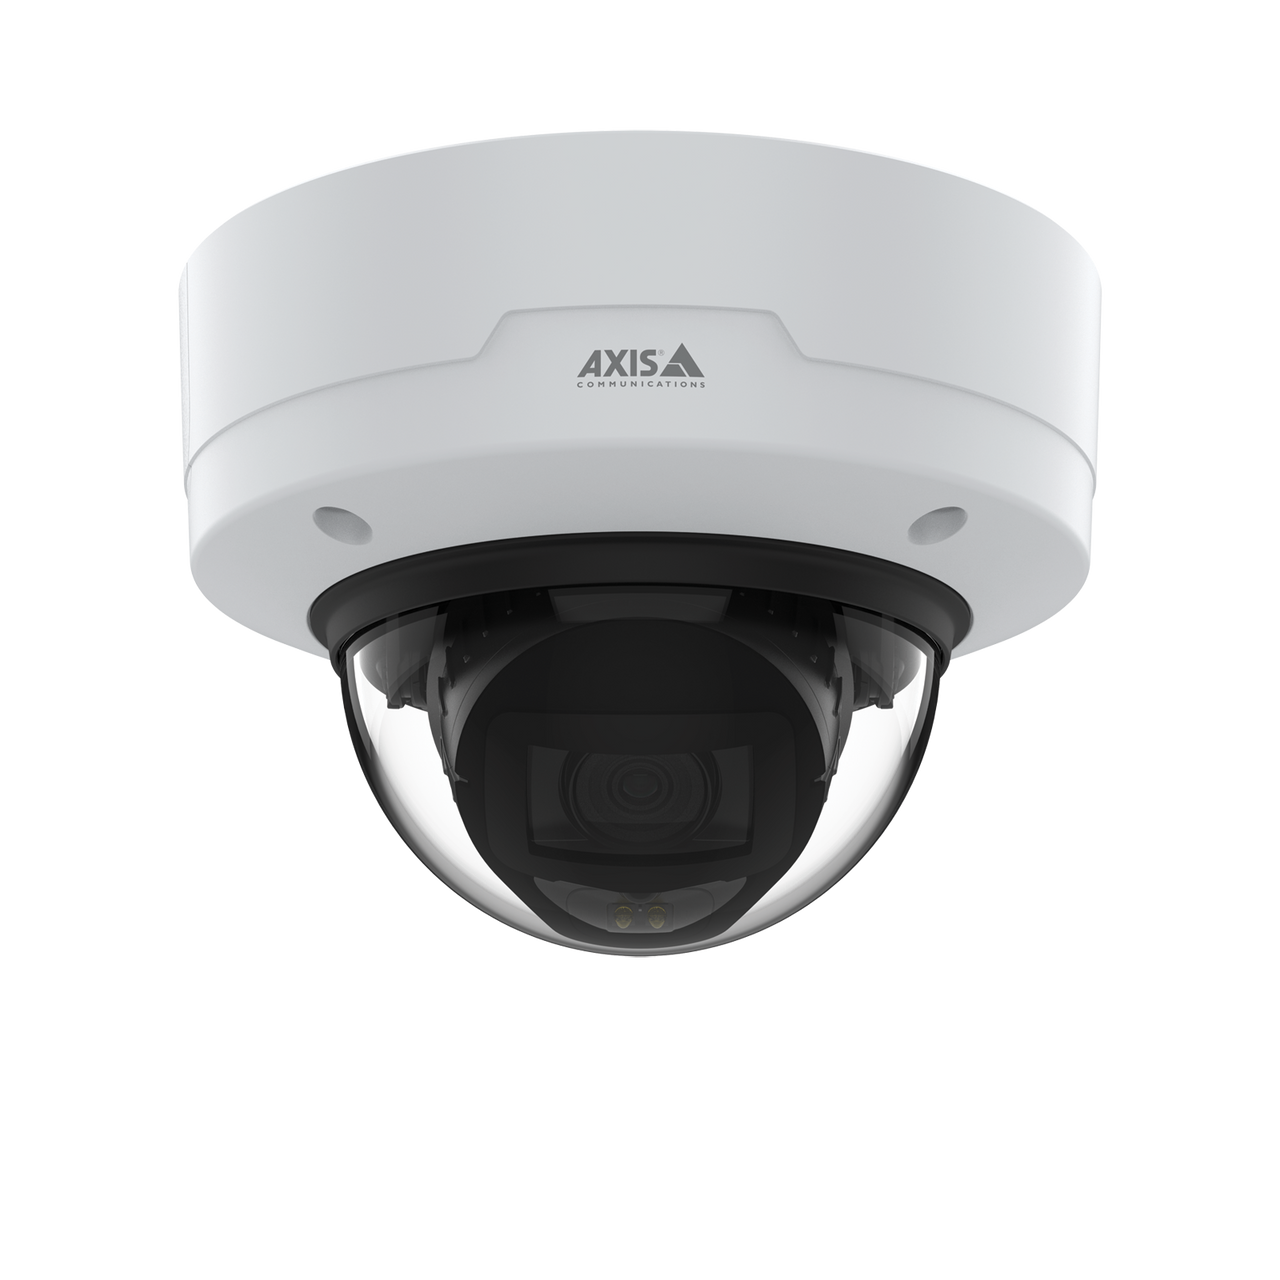 AXIS P3267-LV Indoor 5 MP dome with IR and deep learning